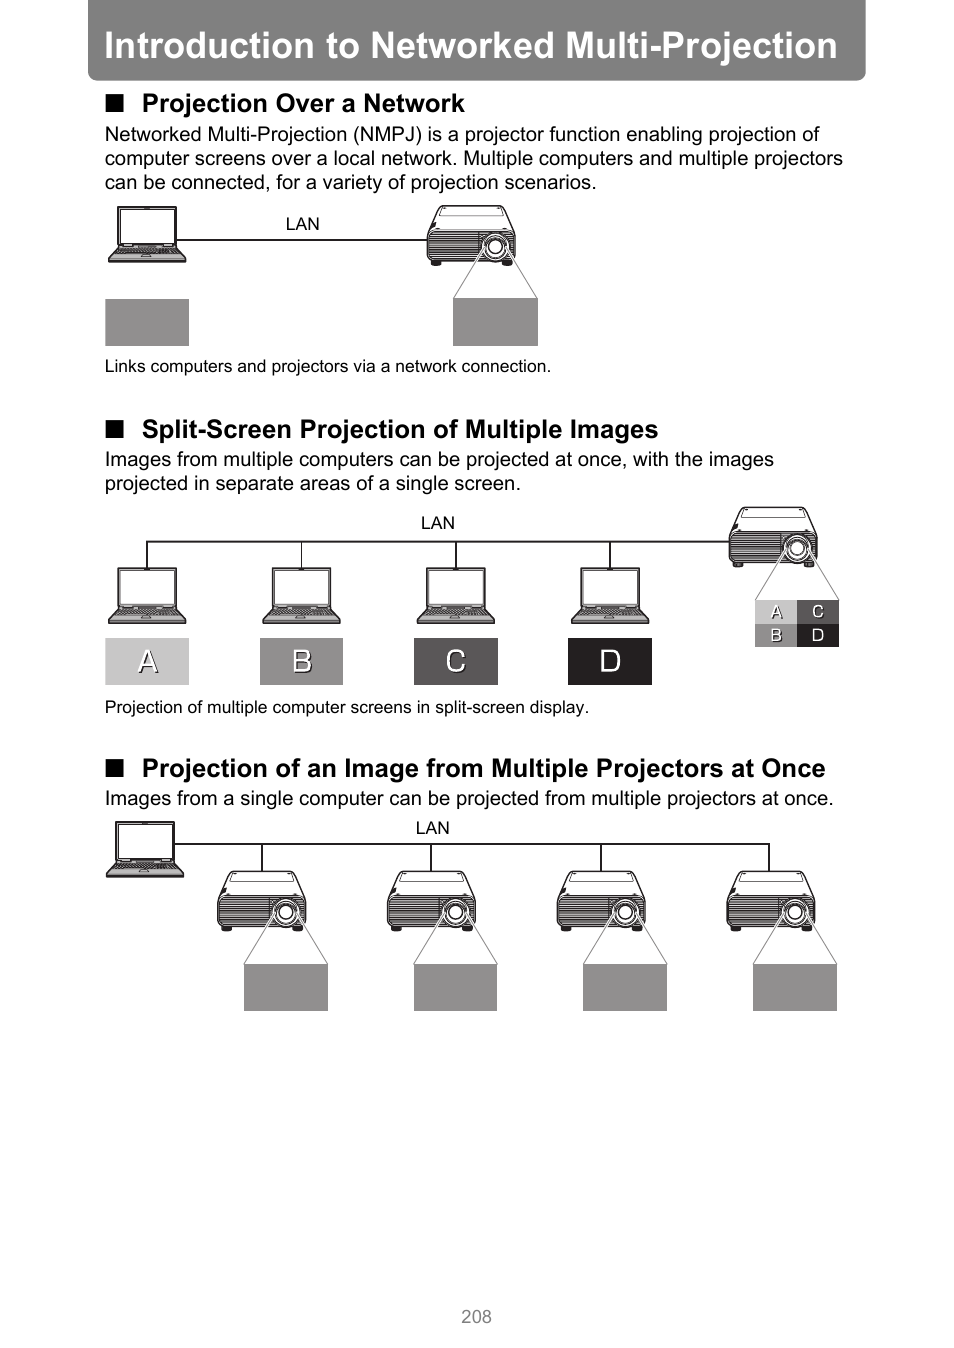 Introduction to networked multi-projection, Projection over a network, Split-screen projection of multiple images | P208 | Canon XEED WUX450 User Manual | Page 208 / 314